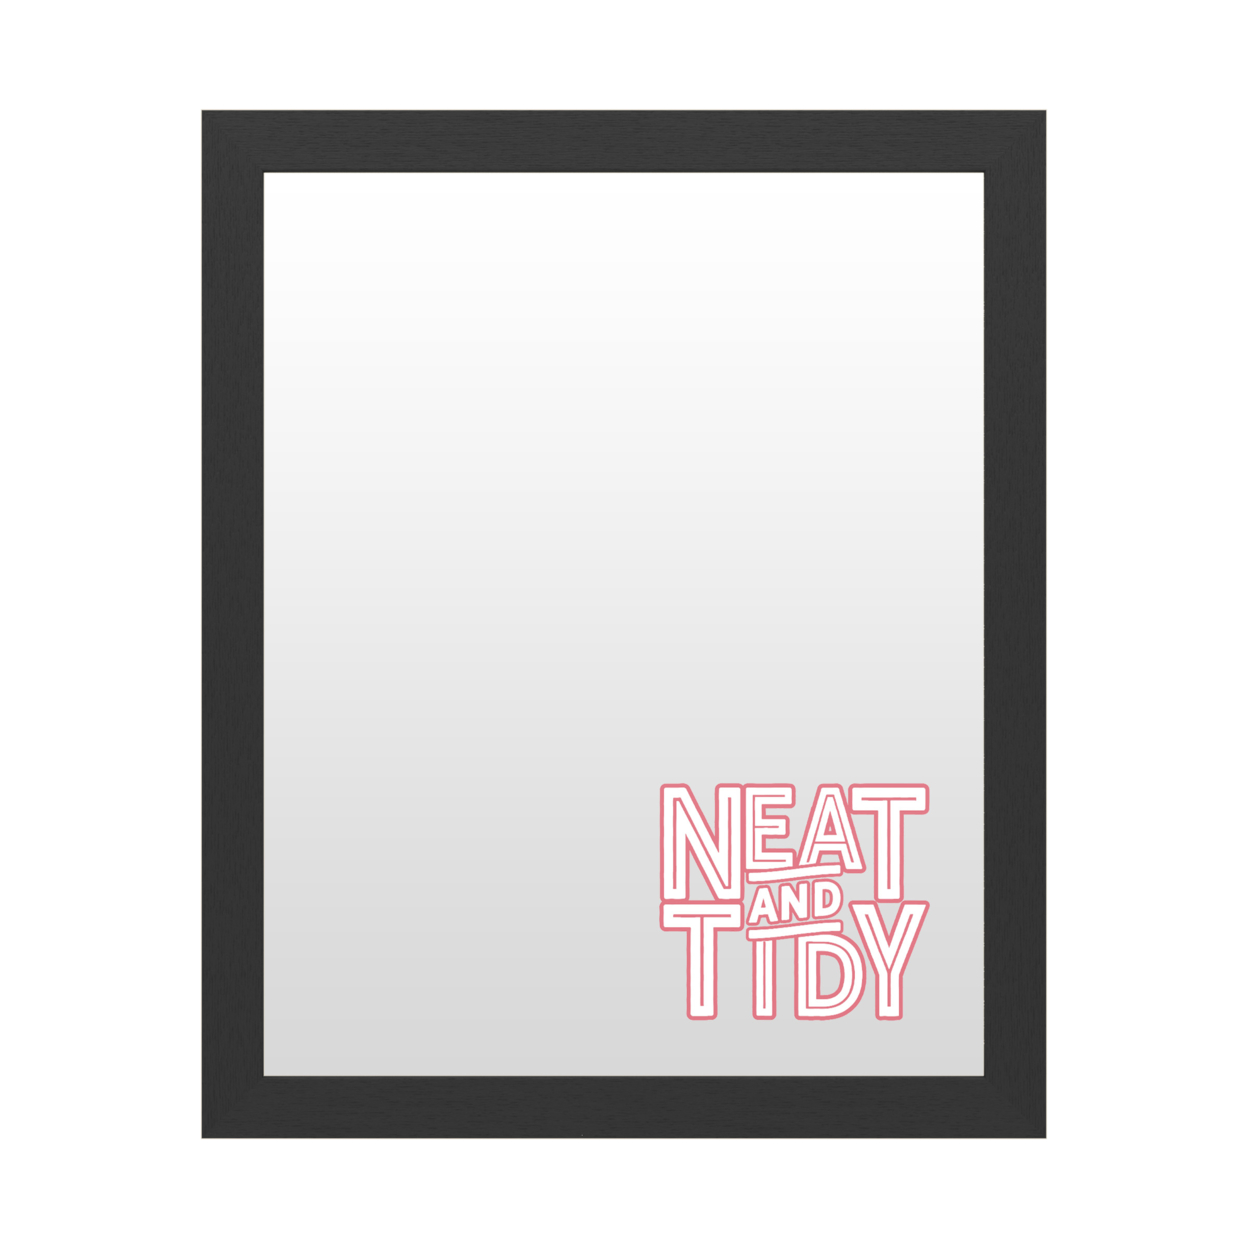 Dry Erase 16 X 20 Marker Board With Printed Artwork - Neat And Tidy Red White Board - Ready To Hang